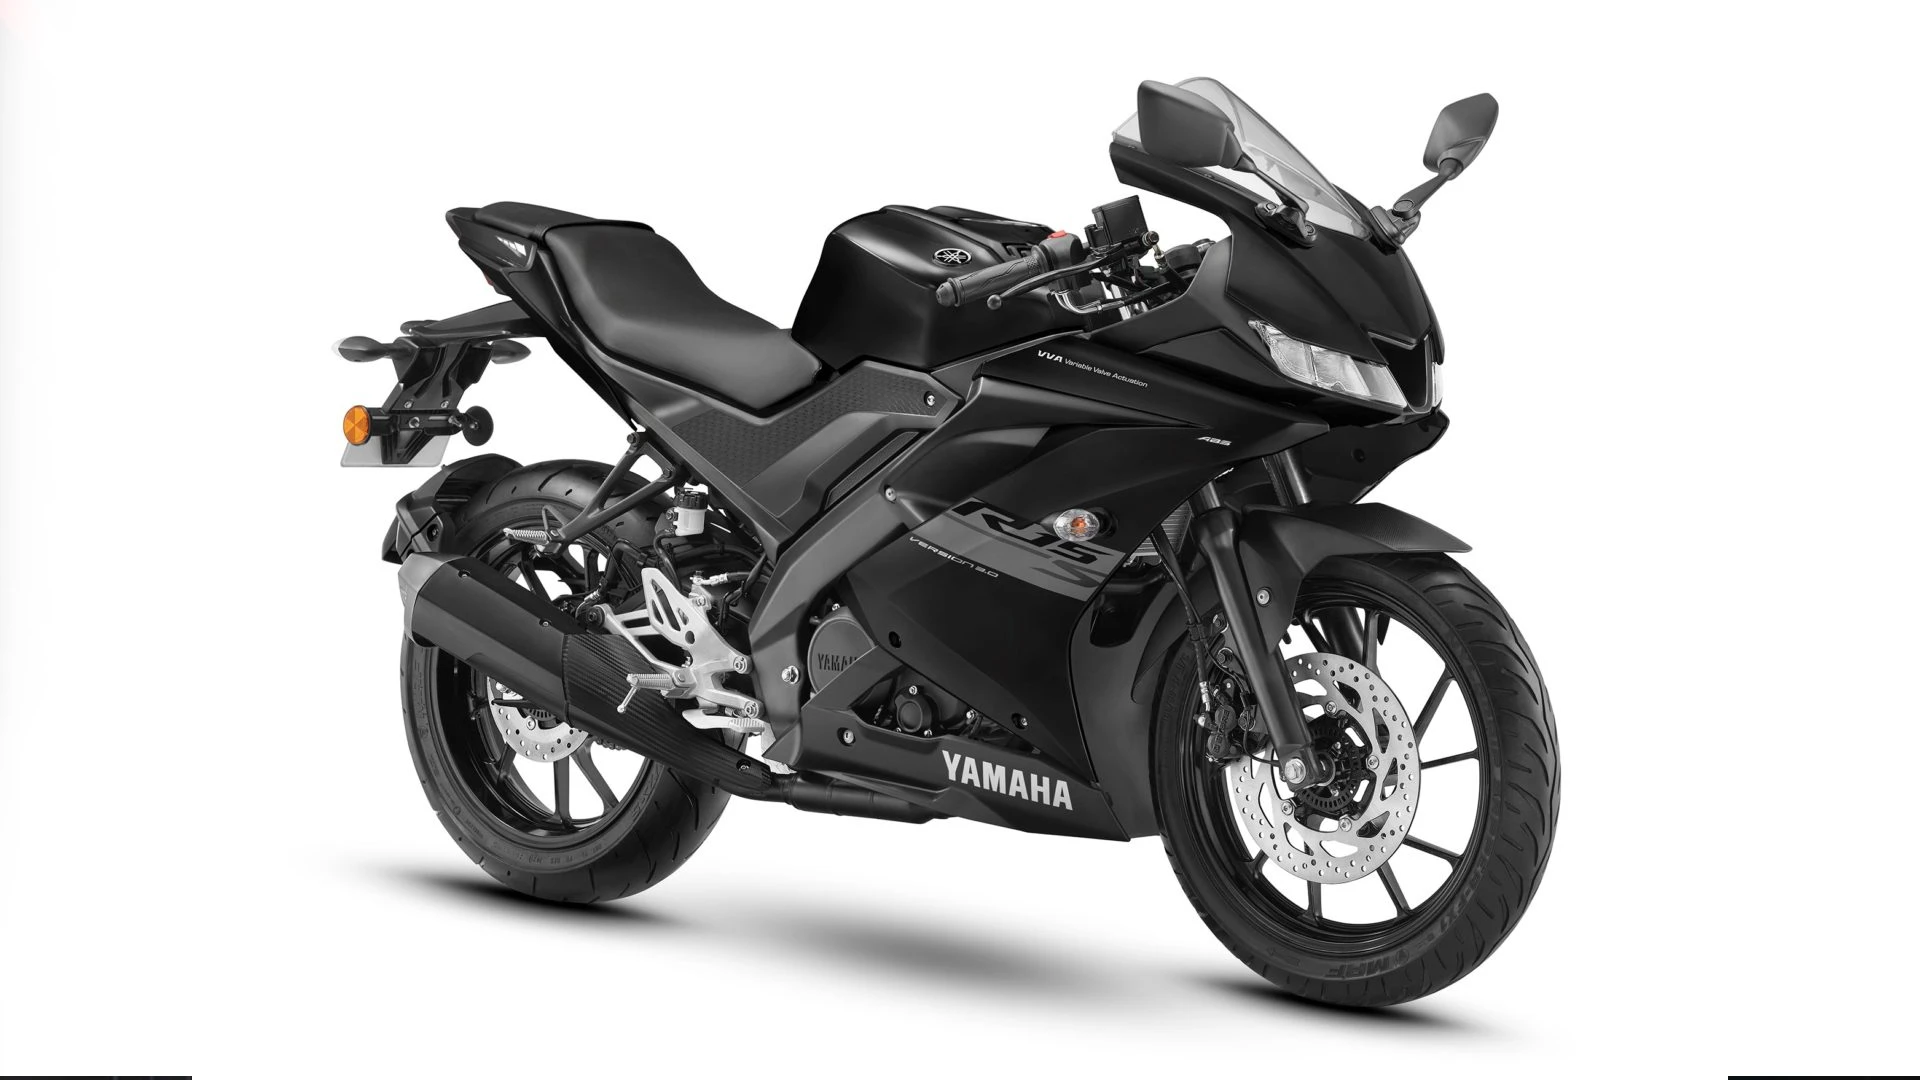 Yamaha YZF-R15S V3 Matte Black Colour Launched, Priced From Rs. 1.61 Lakhs